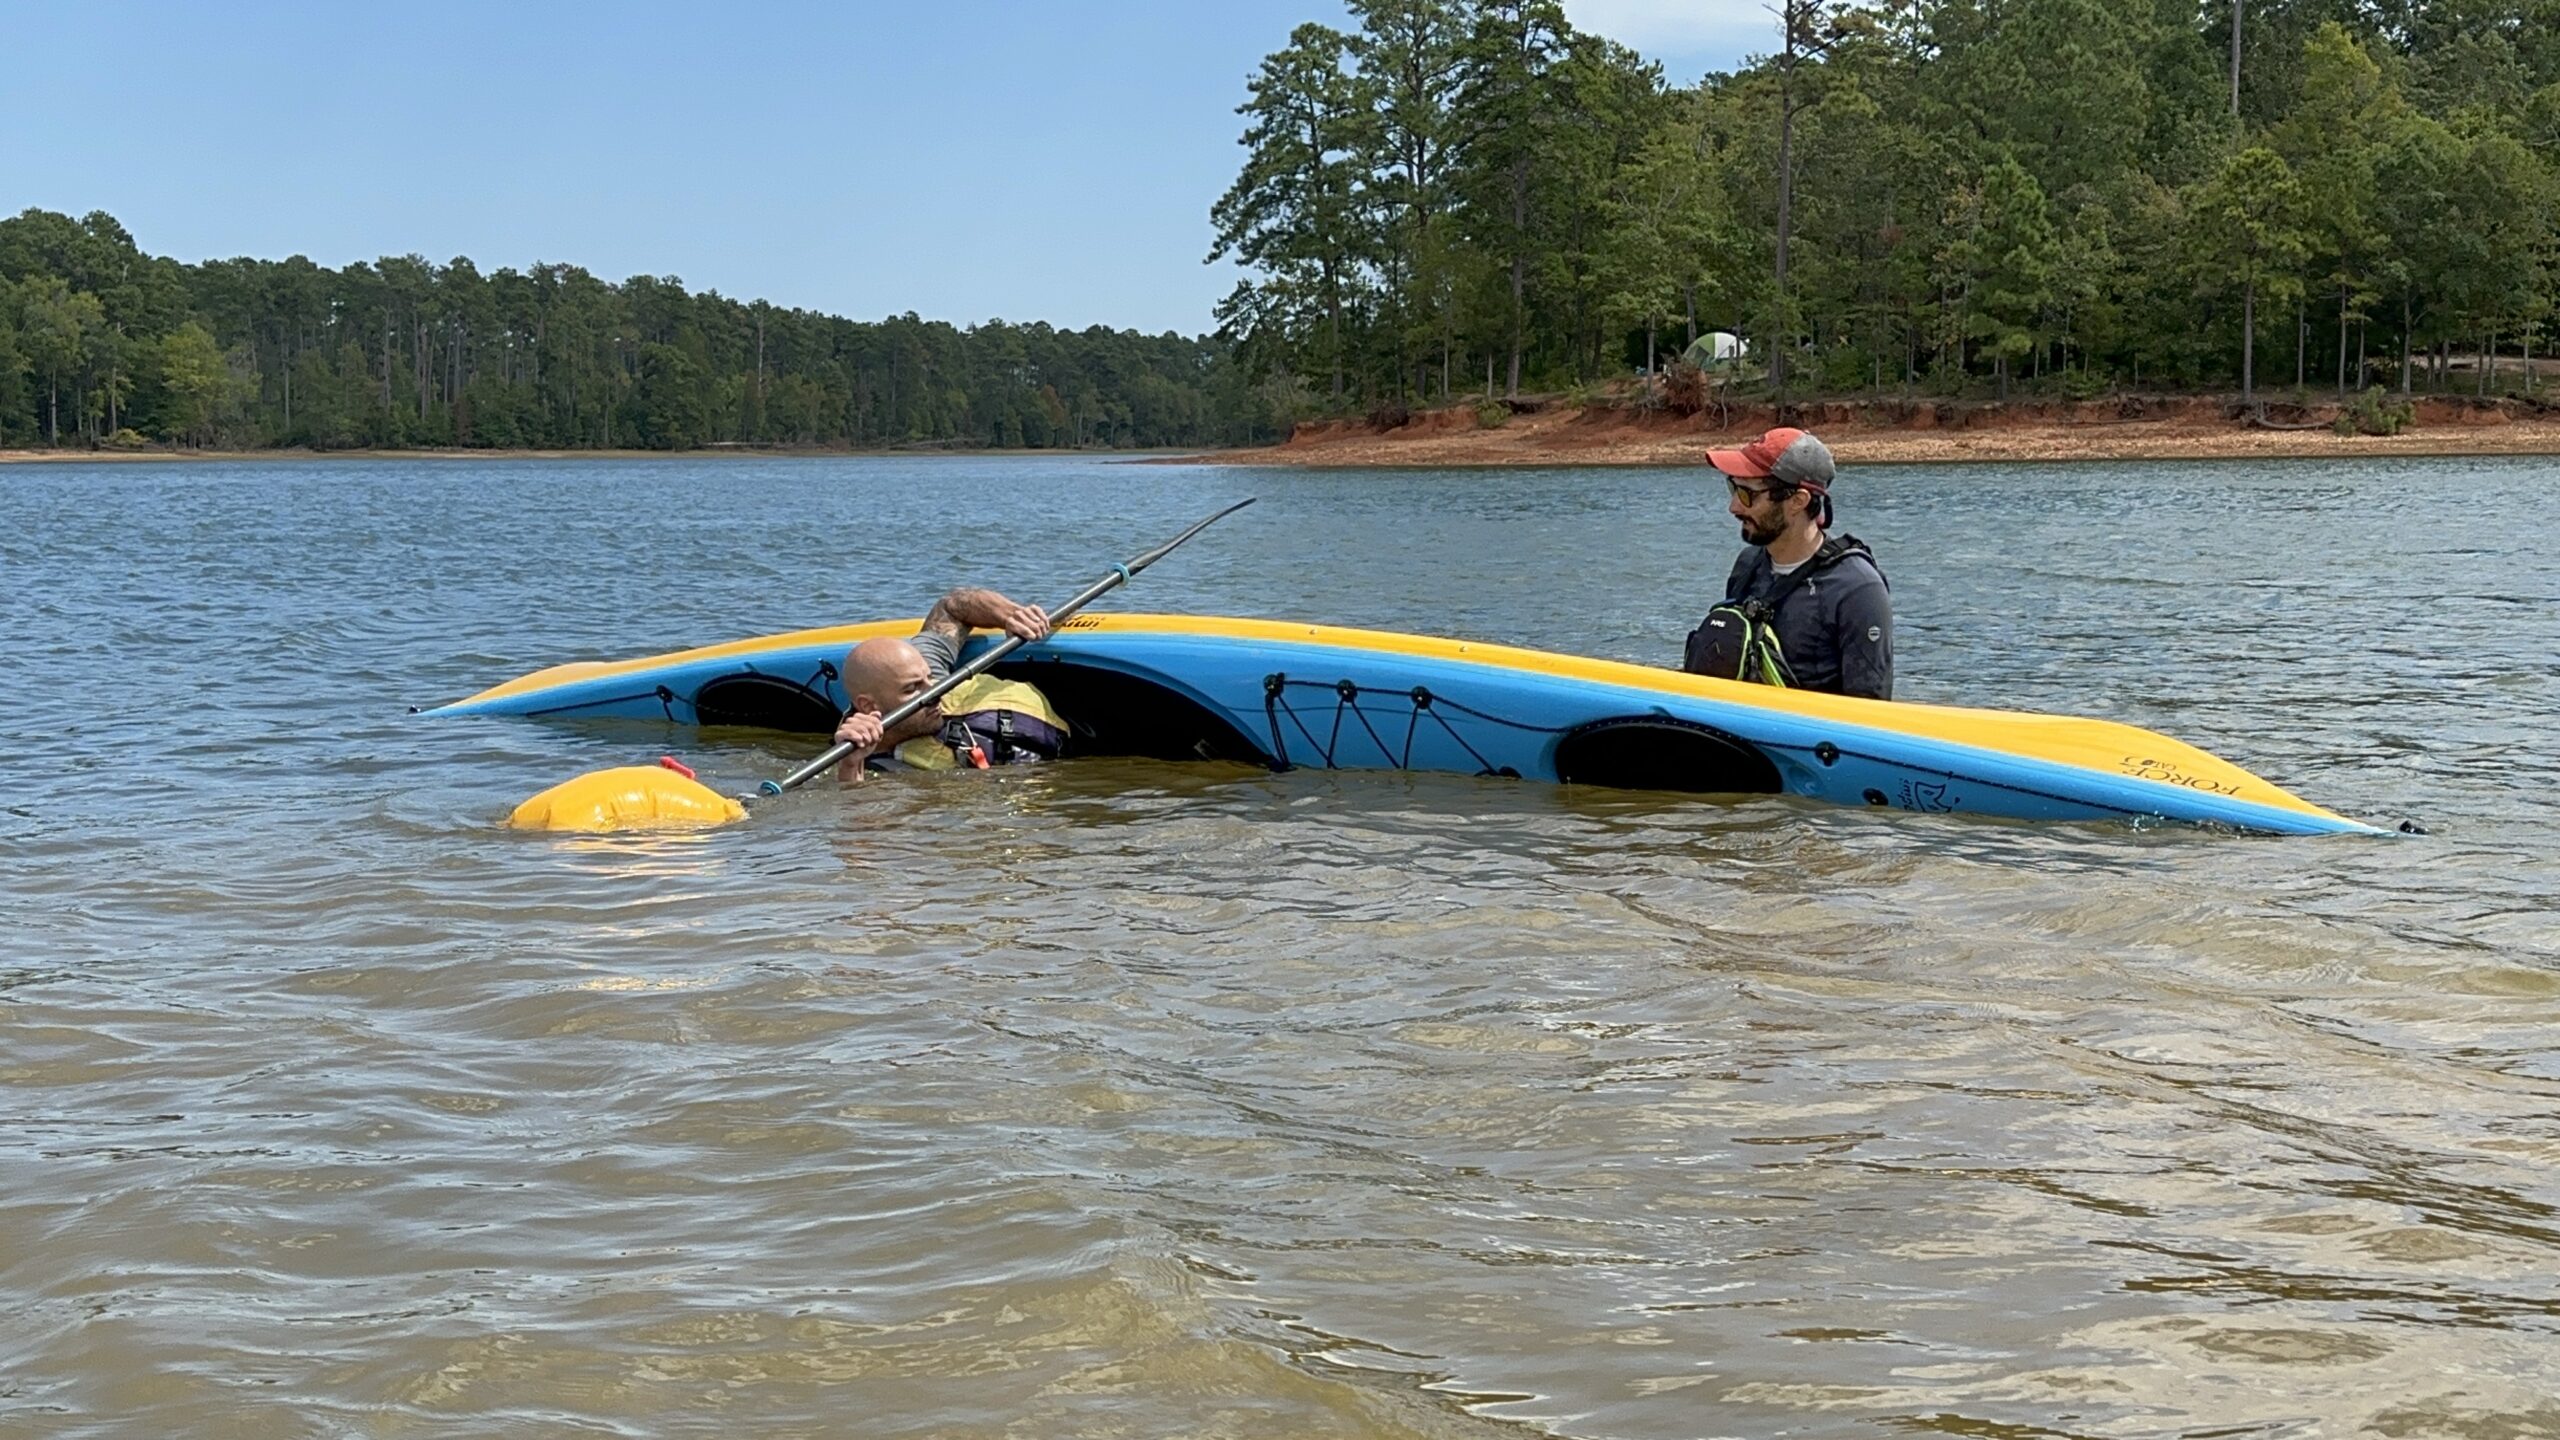 Kayak Skills Camp: Learn How to Kayak With Confidence